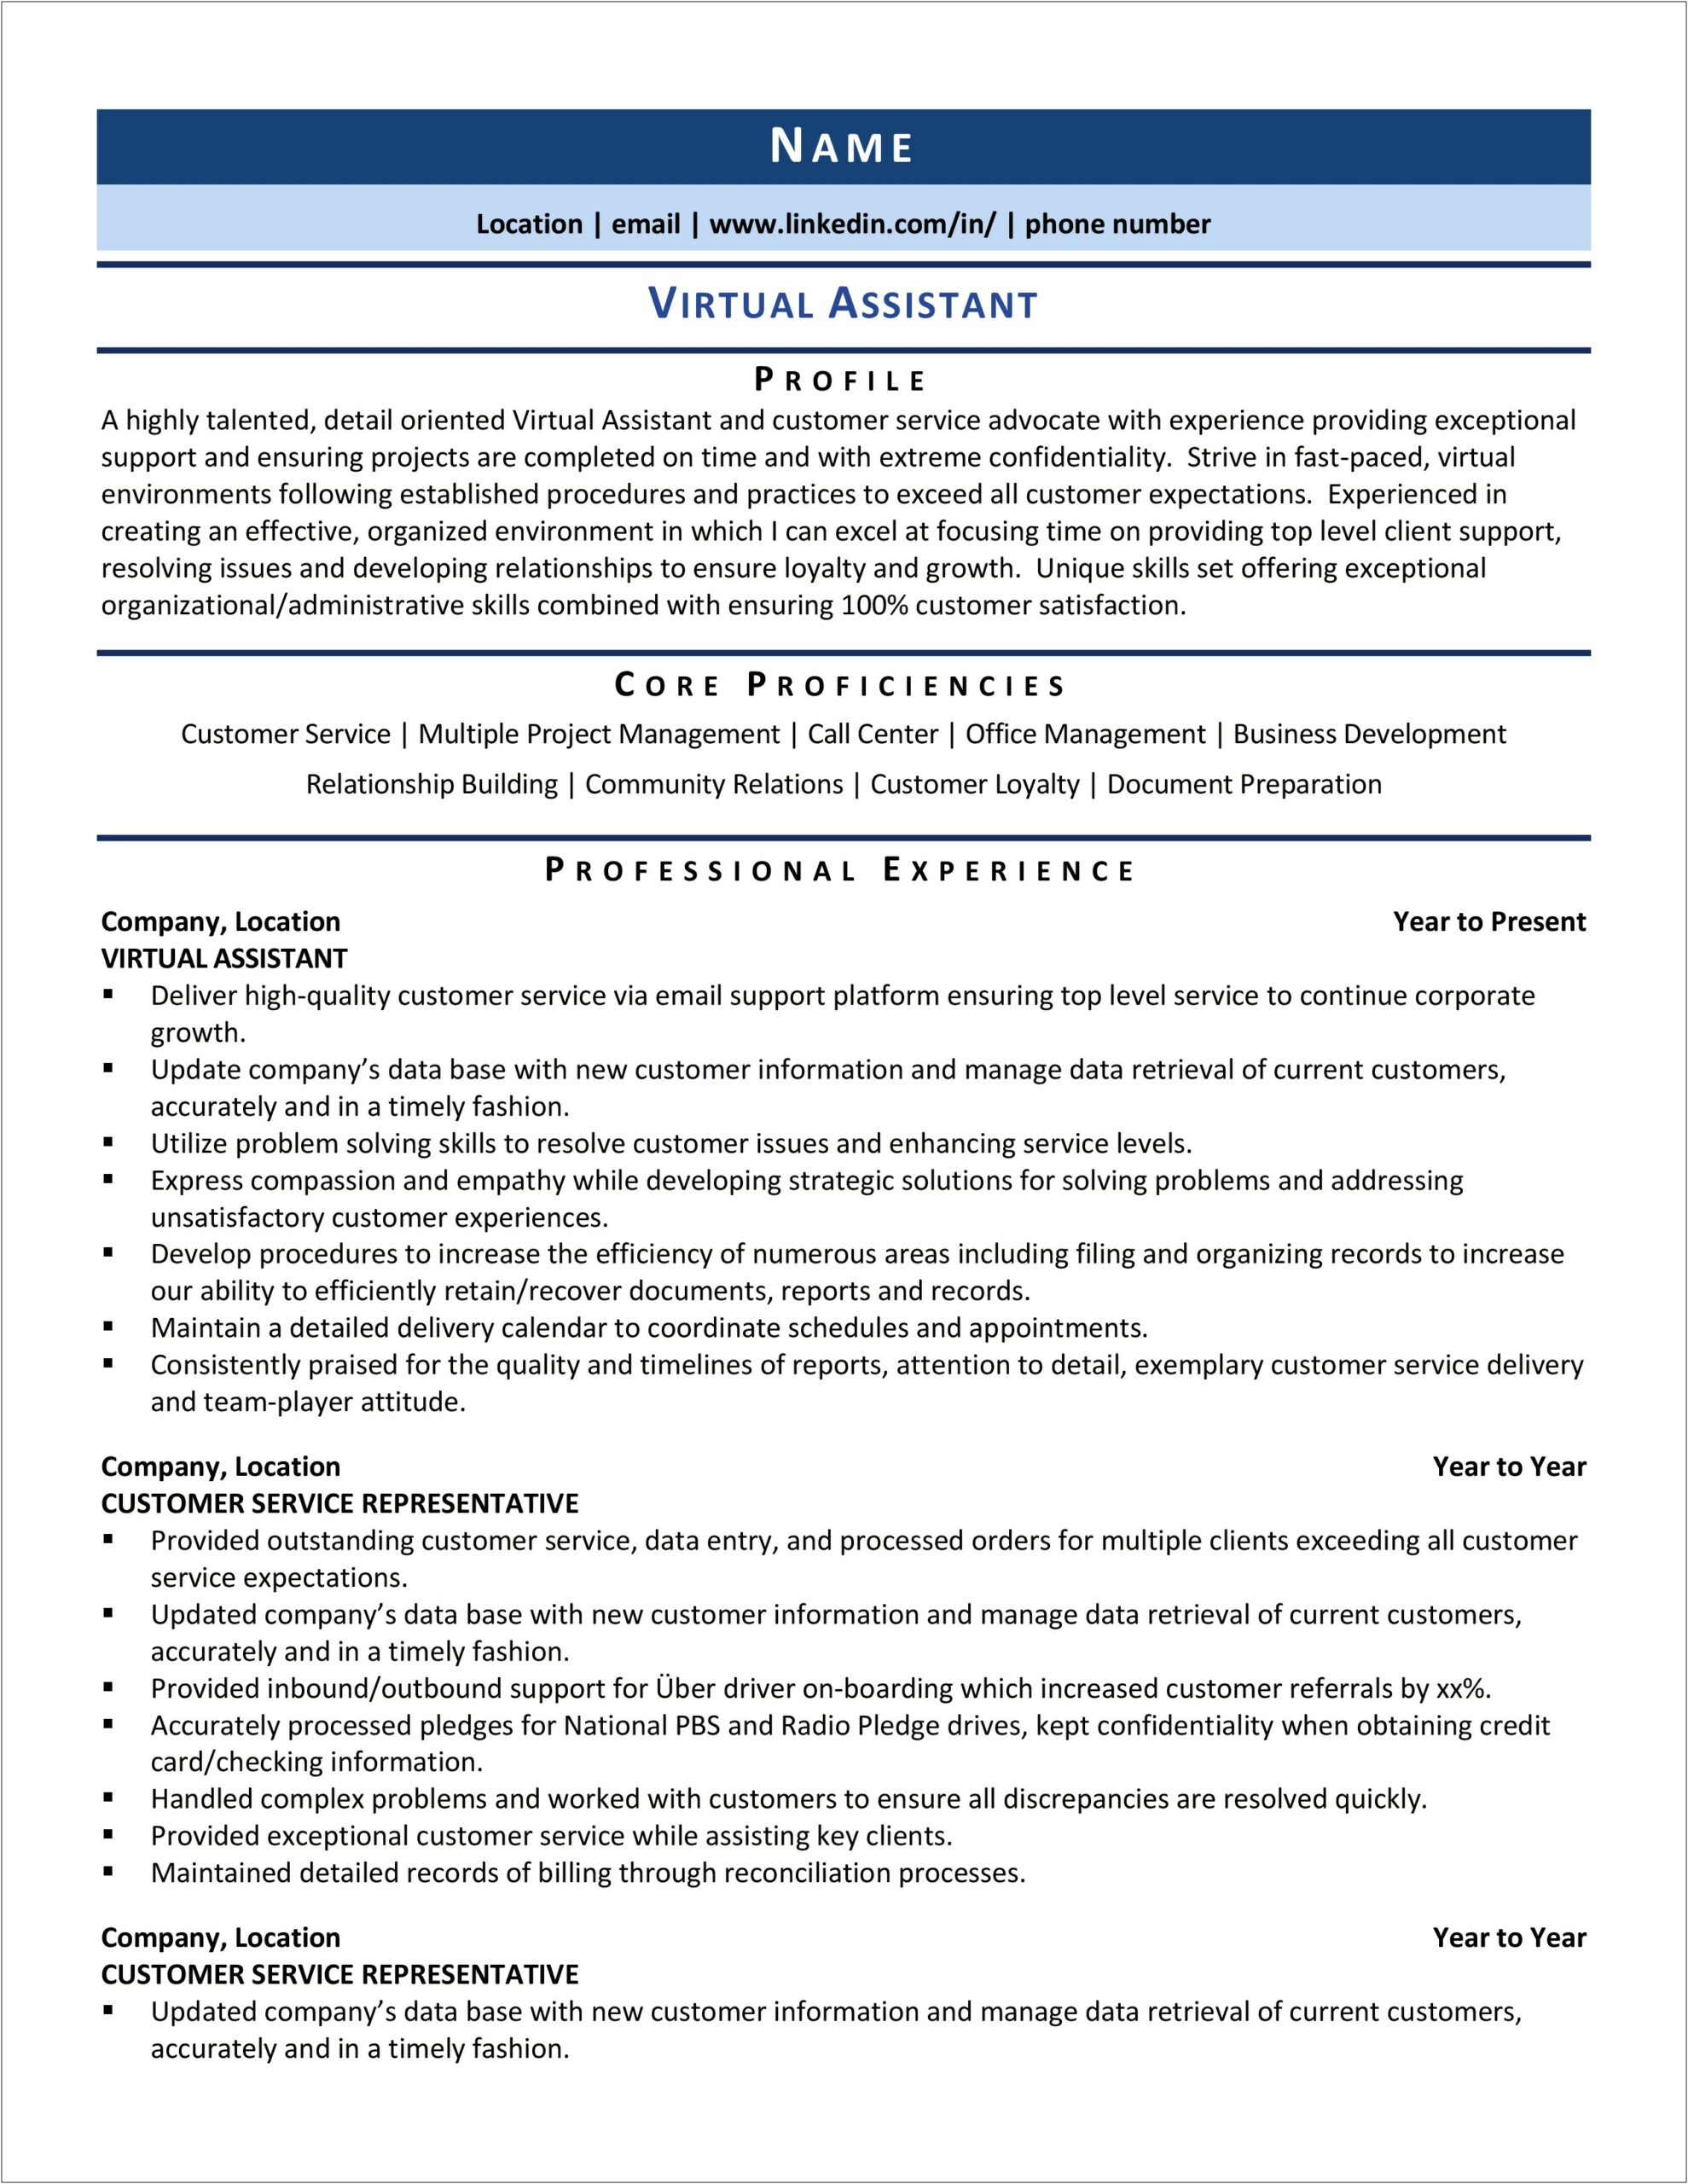 Work From Home Virtual Assistant Resume Templates